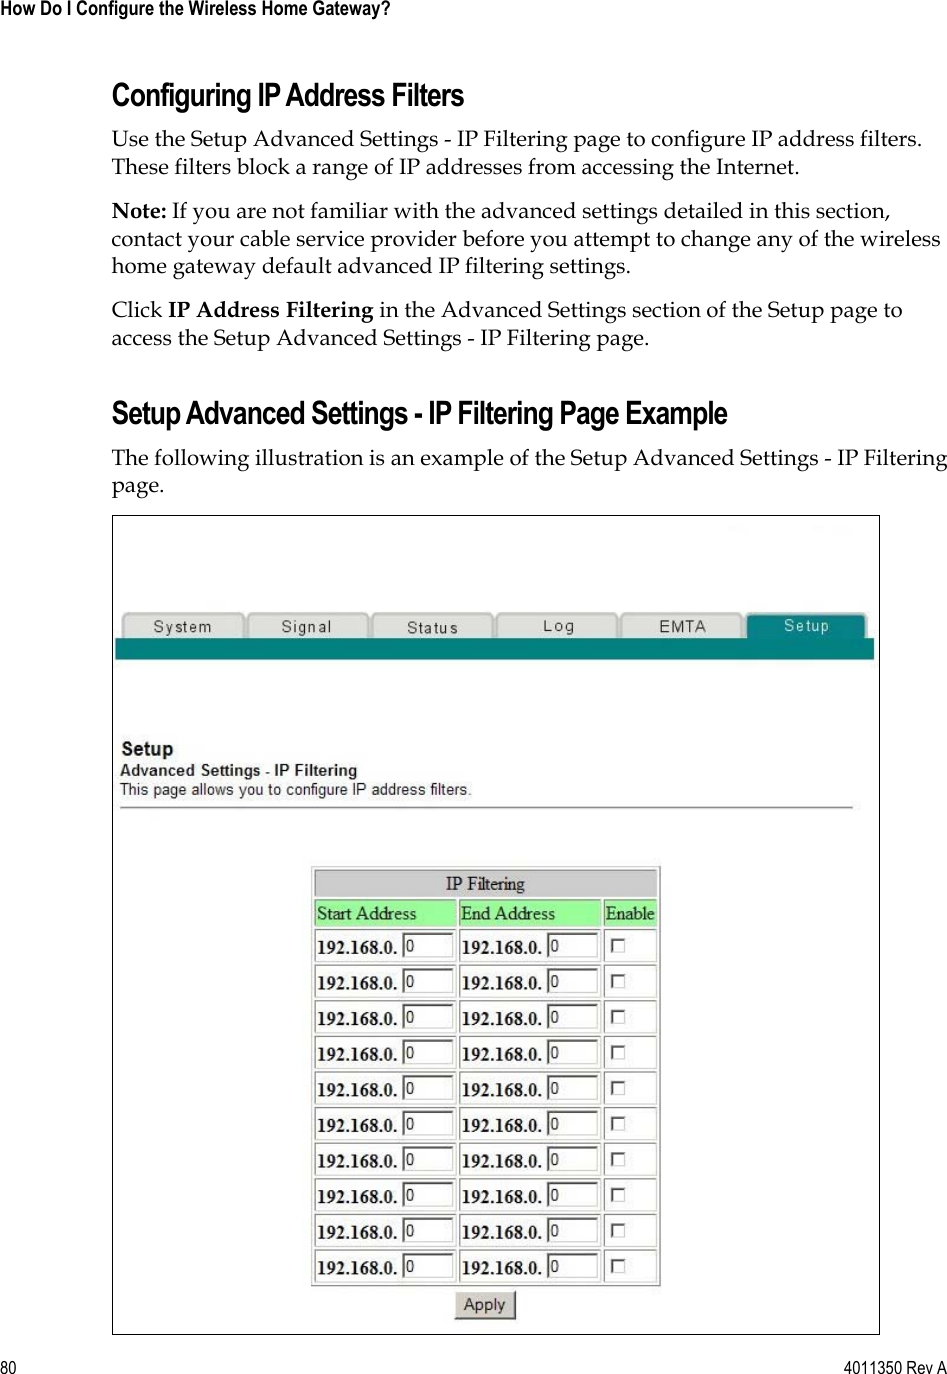 80    4011350 Rev A How Do I Configure the Wireless Home Gateway? Configuring IP Address Filters Use the Setup Advanced Settings - IP Filtering page to configure IP address filters. These filters block a range of IP addresses from accessing the Internet. Note: If you are not familiar with the advanced settings detailed in this section, contact your cable service provider before you attempt to change any of the wireless home gateway default advanced IP filtering settings. Click IP Address Filtering in the Advanced Settings section of the Setup page to access the Setup Advanced Settings - IP Filtering page. Setup Advanced Settings - IP Filtering Page Example The following illustration is an example of the Setup Advanced Settings - IP Filtering page.